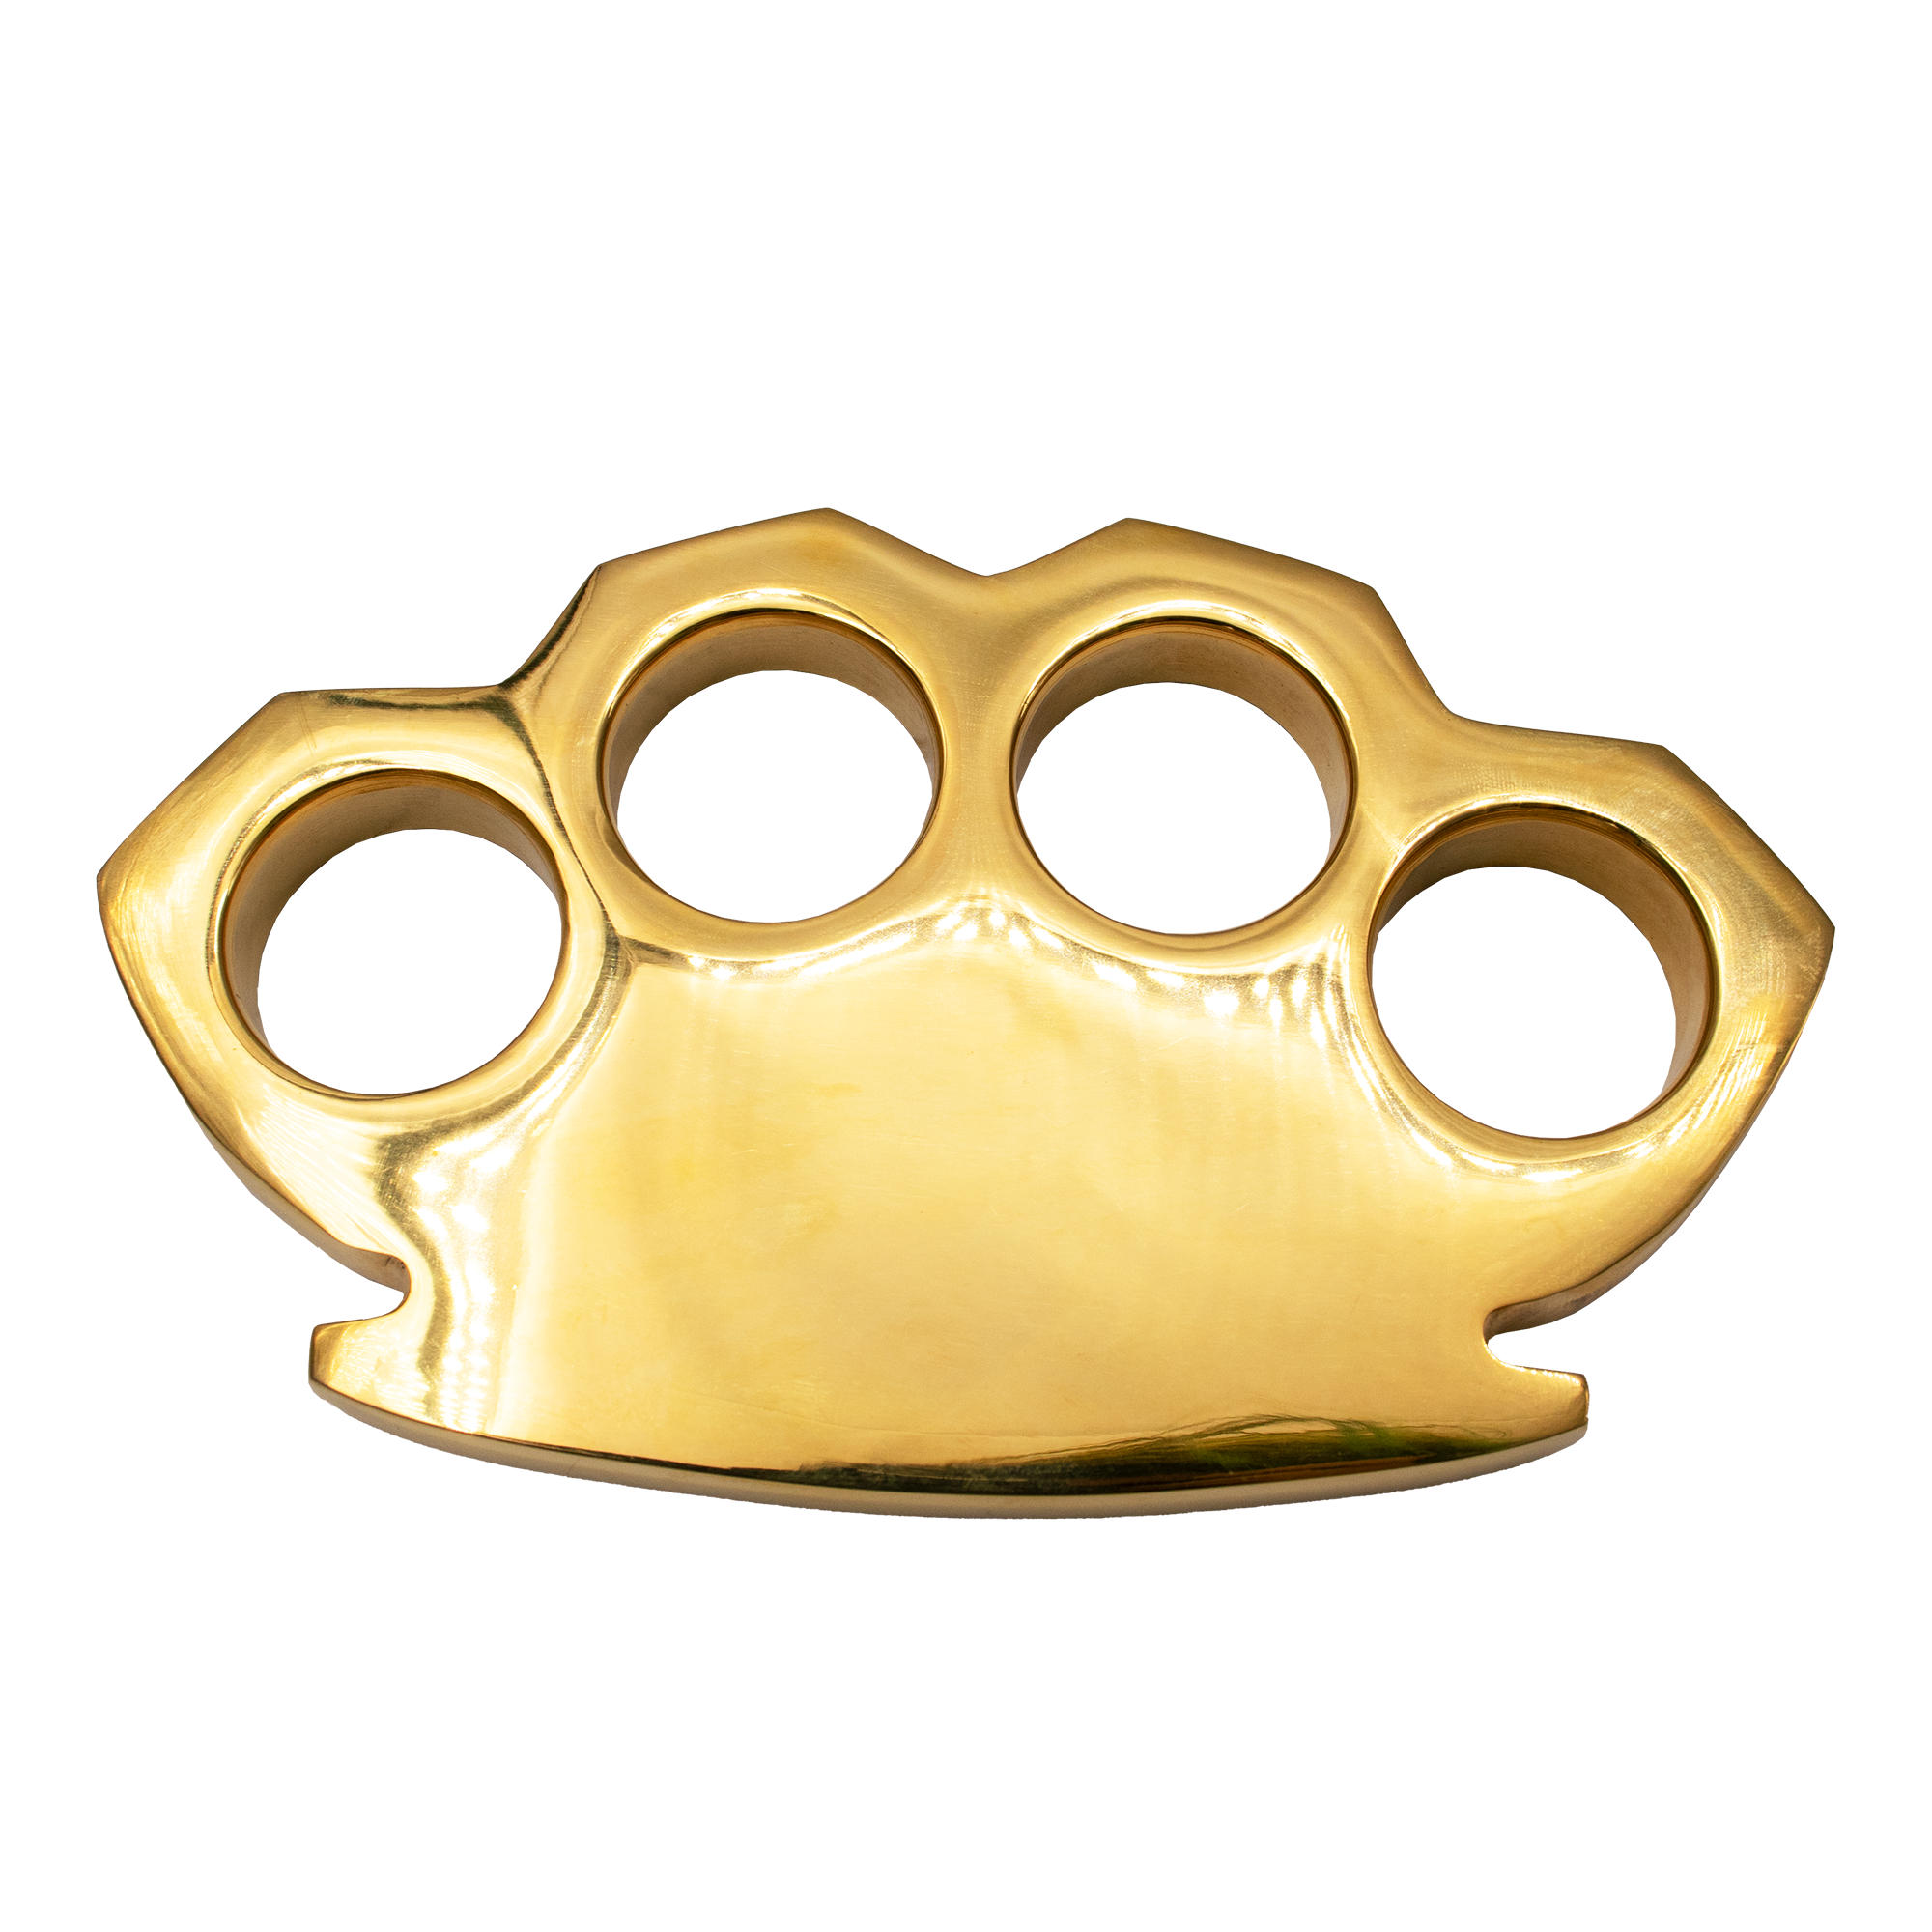 2.25 Pound EXTRA LARGE Heavy Duty Brass Knuckle Duster Paper